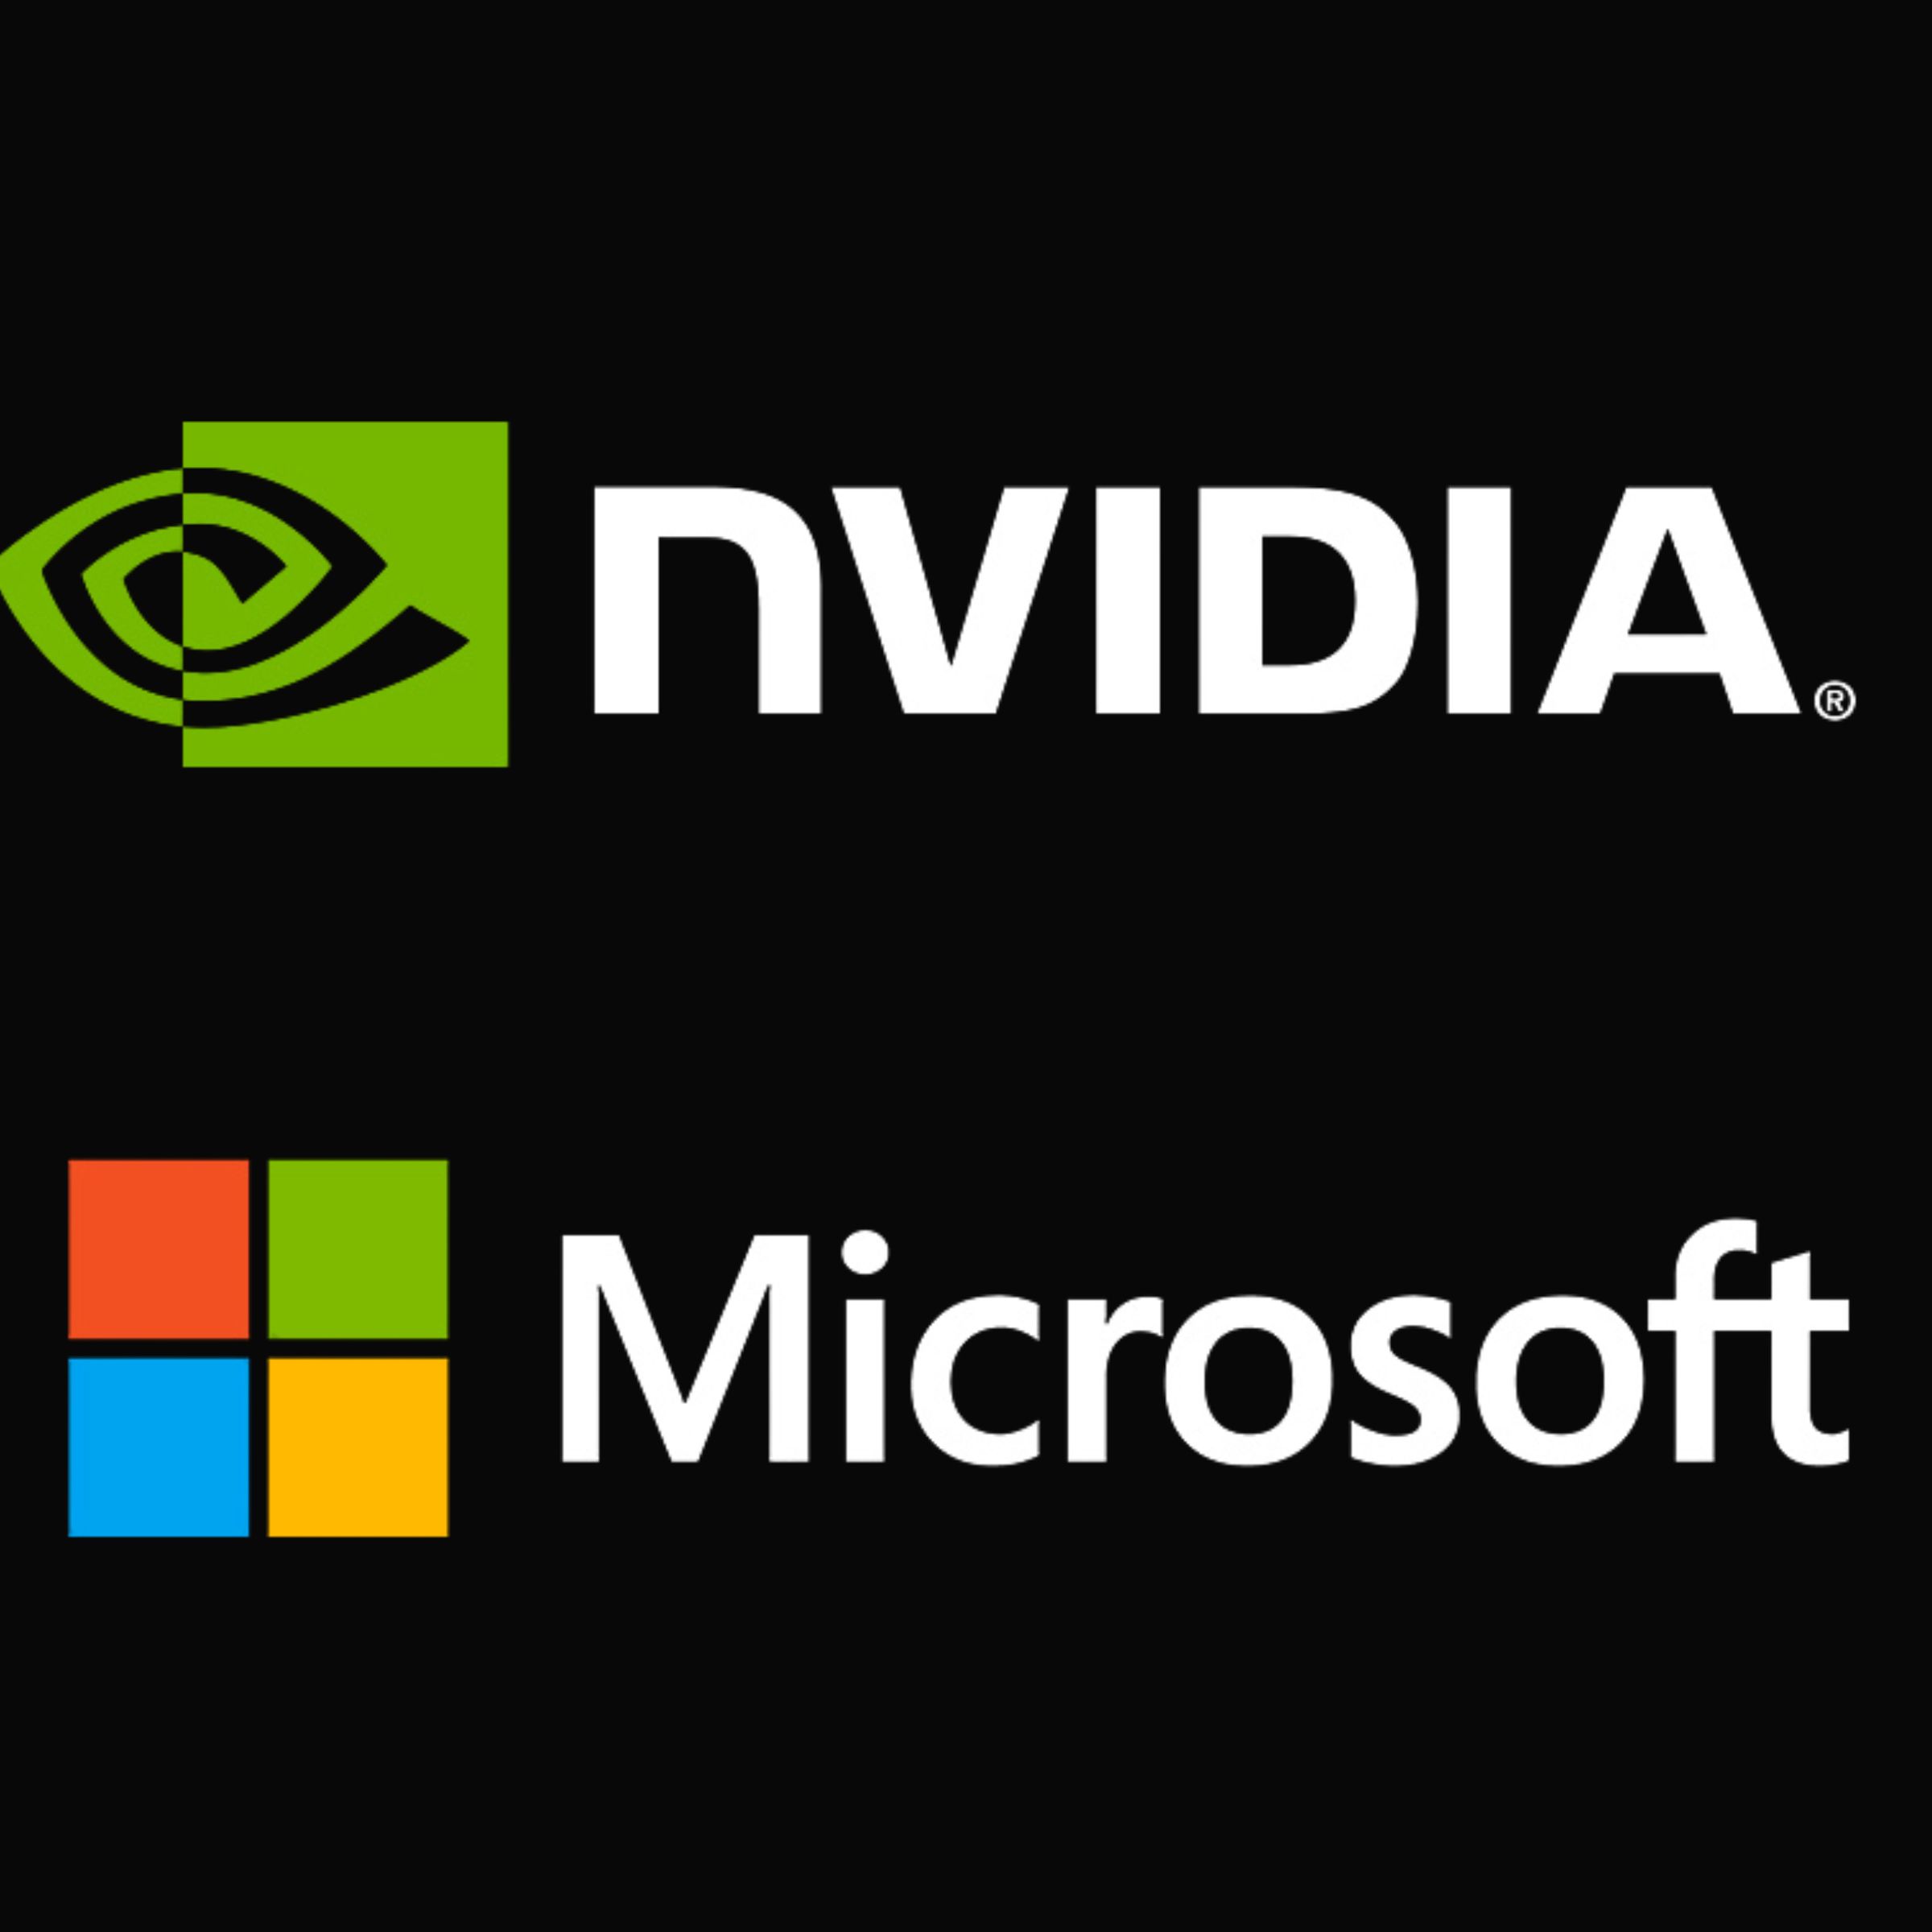 The brand logos for Nvidia and Microsoft on a plain back backdrop.